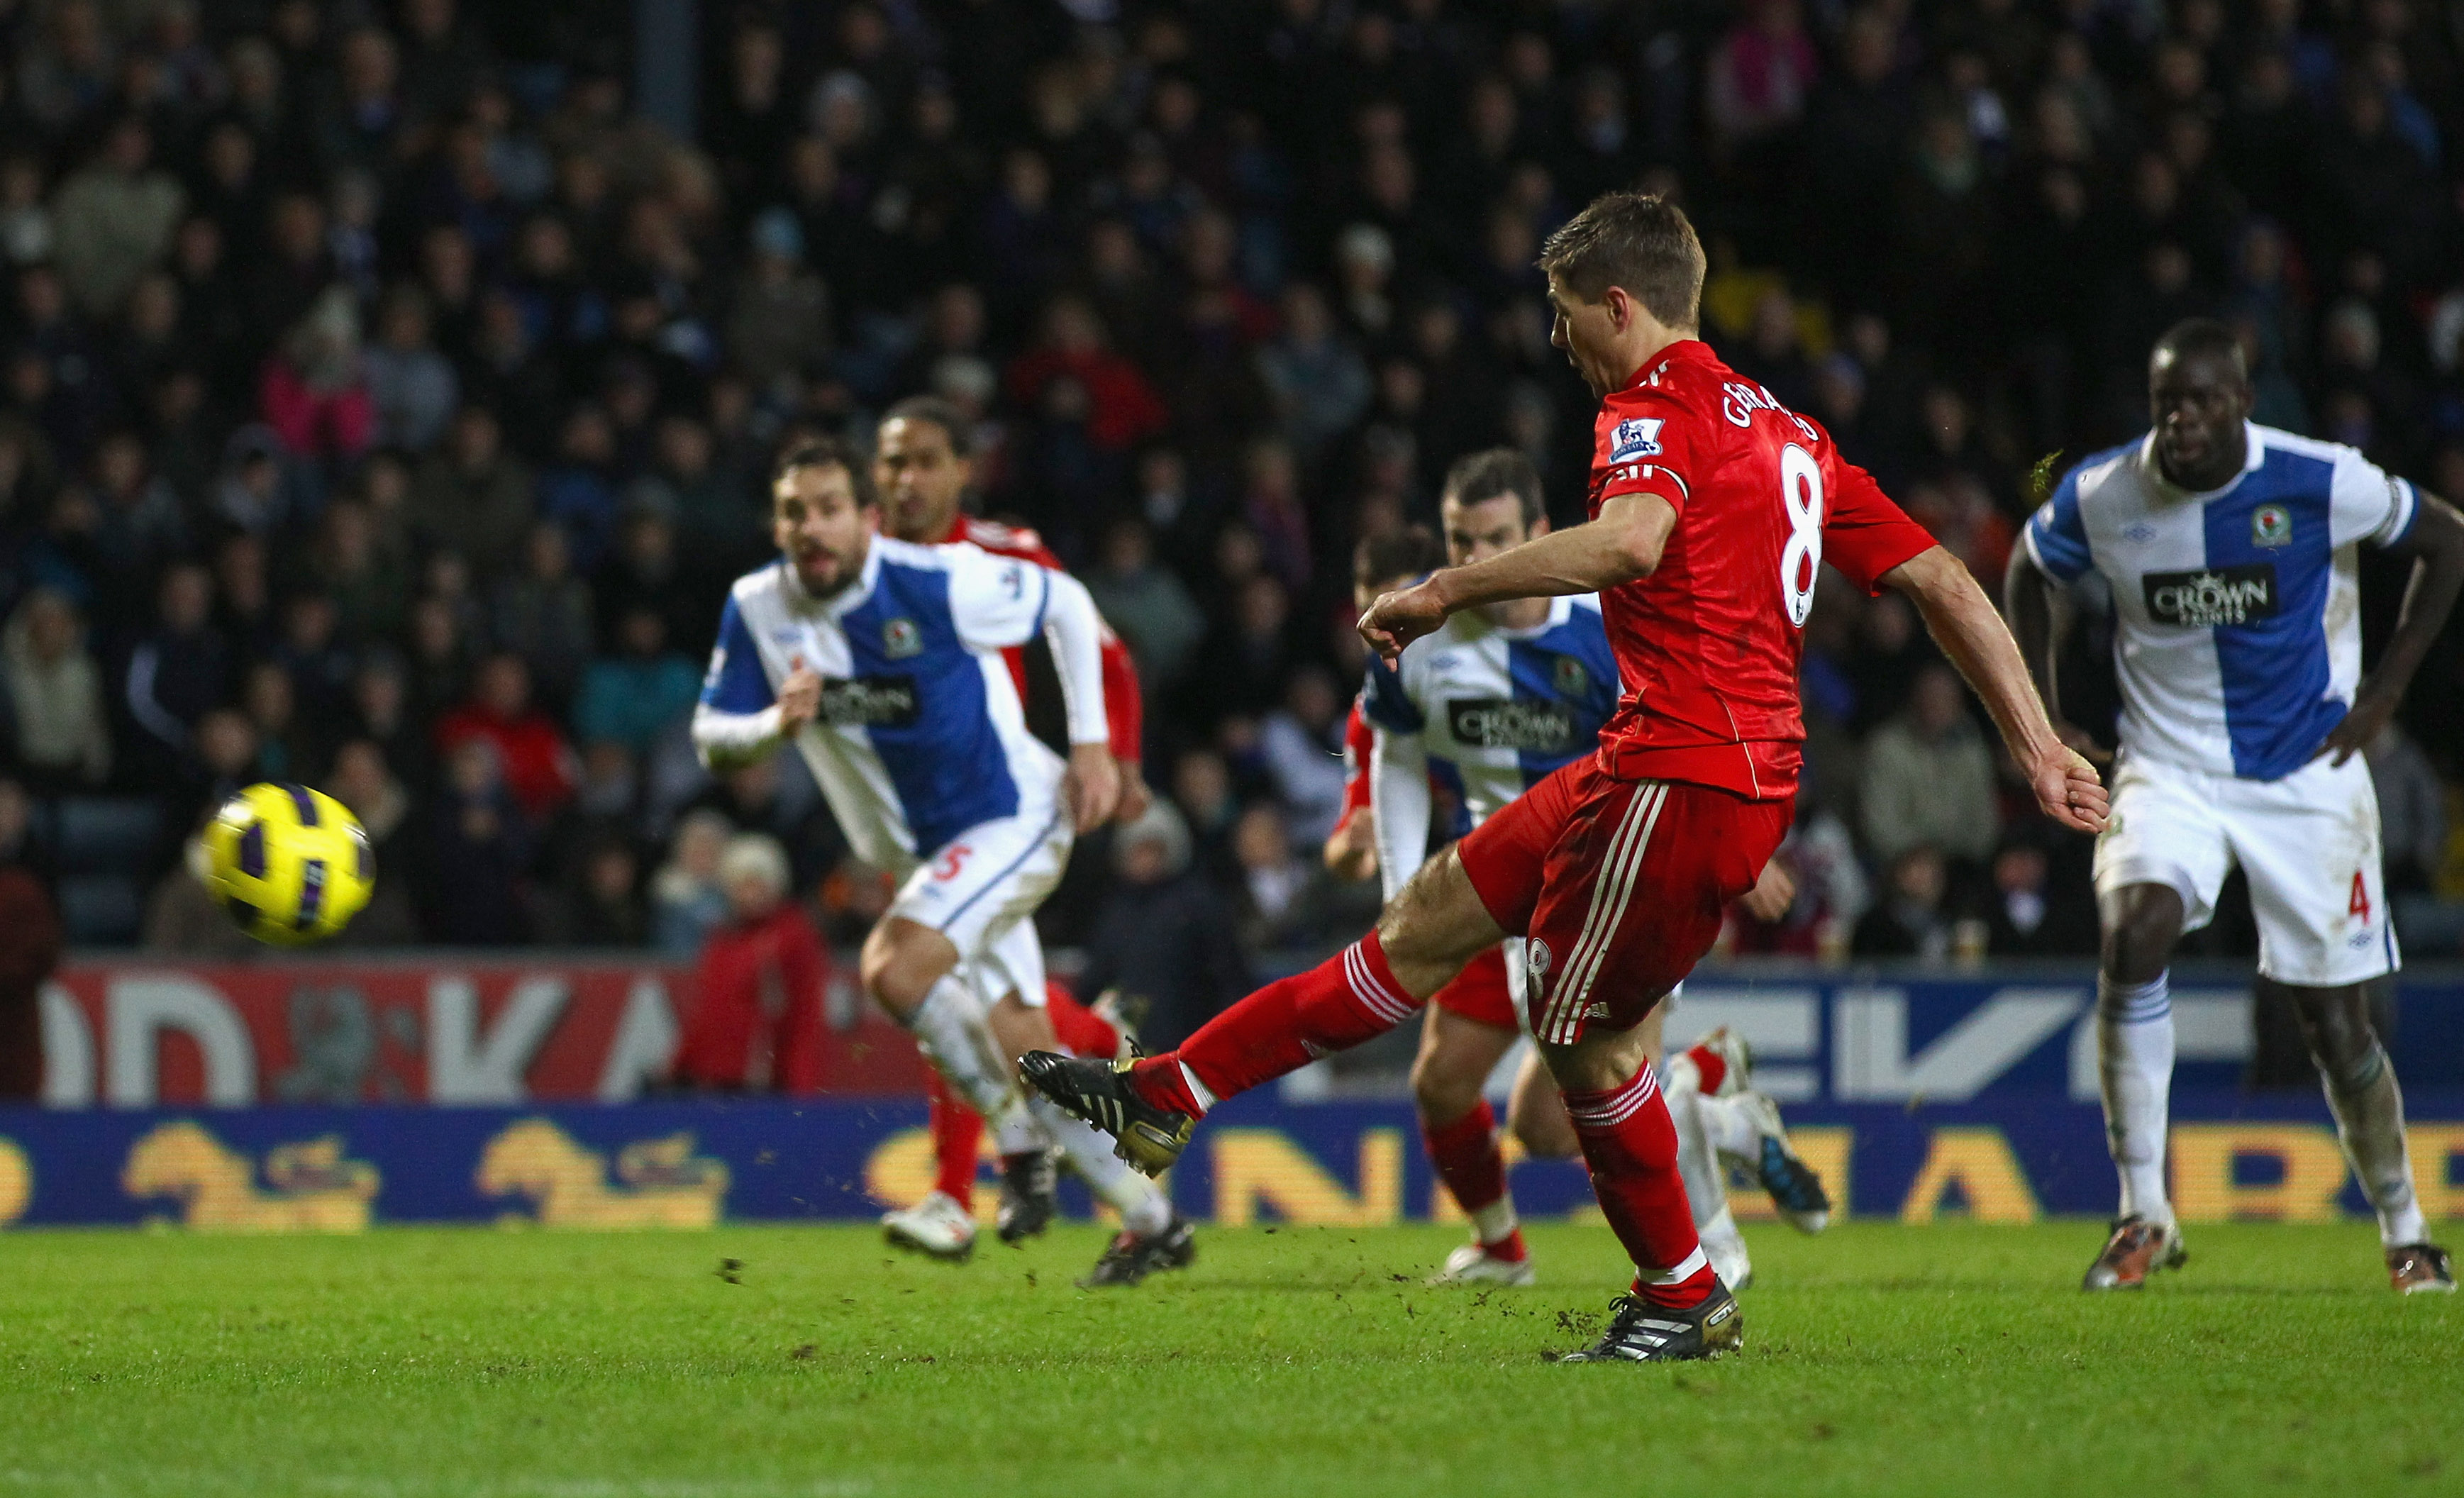 BLACKBURN, ENGLAND - JANUARY 05: Steven Gerrard of Liverpool fires his penalty over the cross bar during the Barclays Premier League match between Blackburn Rovers and Liverpool at Ewood park on January 5, 2011 in Blackburn, England.  (Photo by Clive Brun